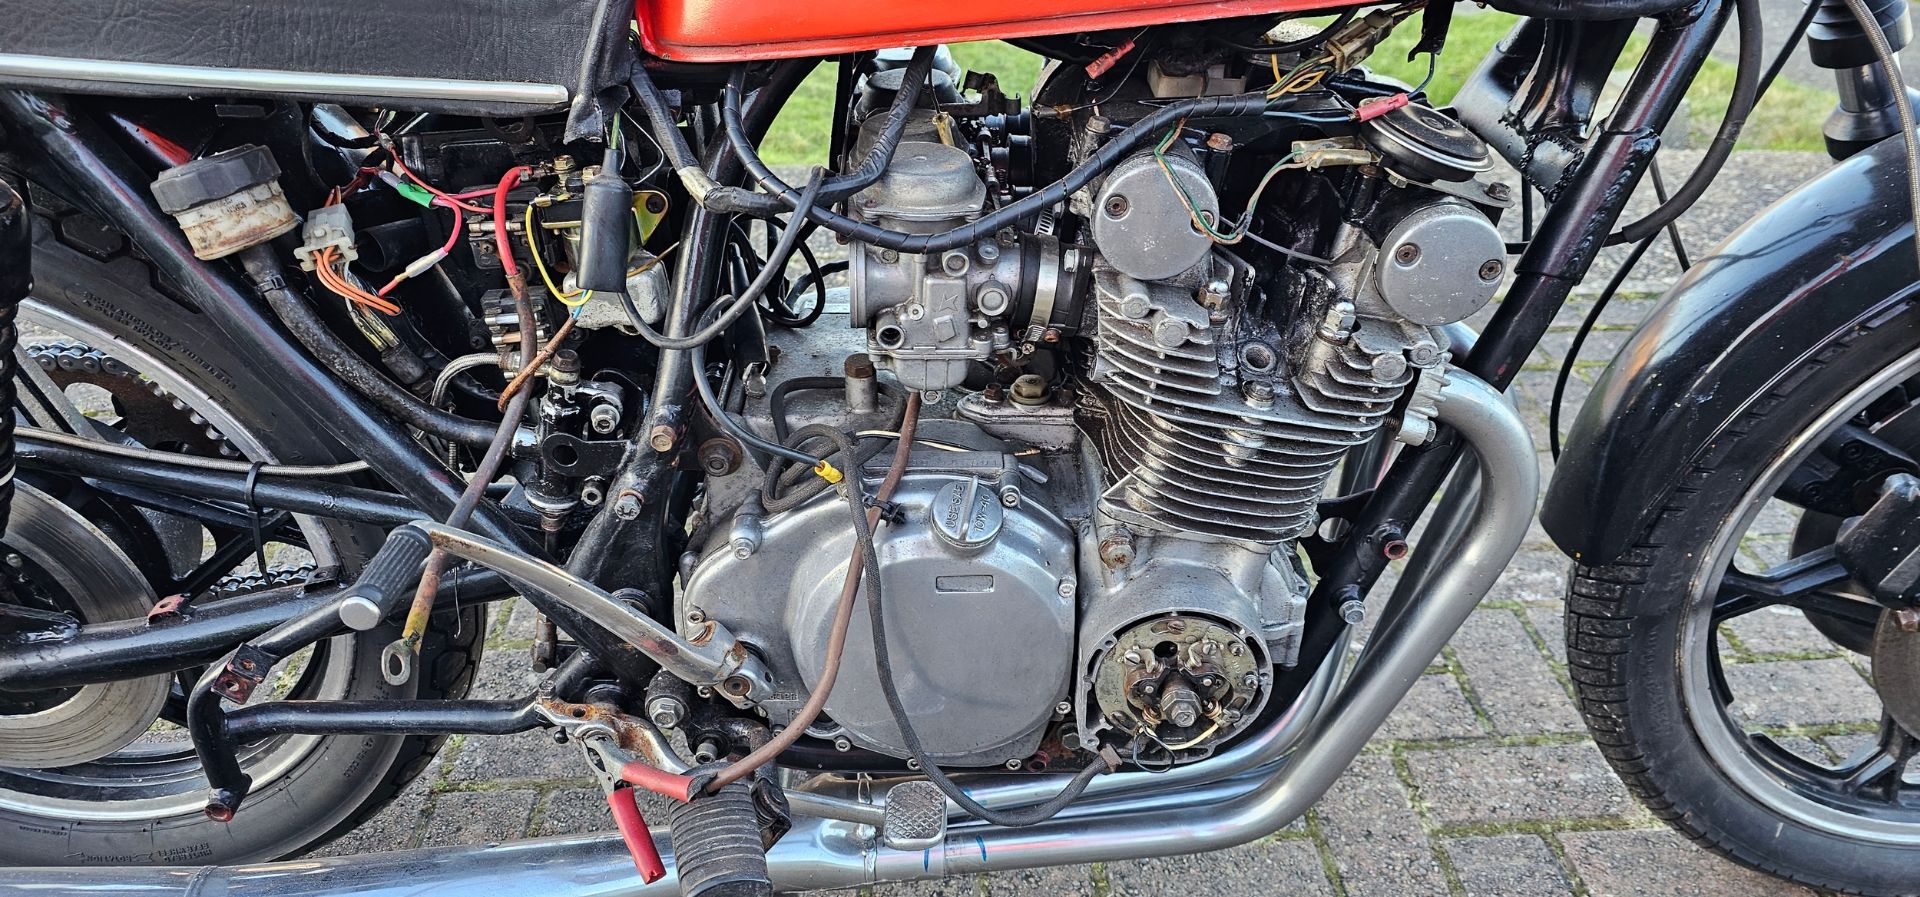 1979 Suzuki GS 550, 548cc. Registration number CWF 633T. Frame number not found. Engine number GS550 - Image 6 of 12